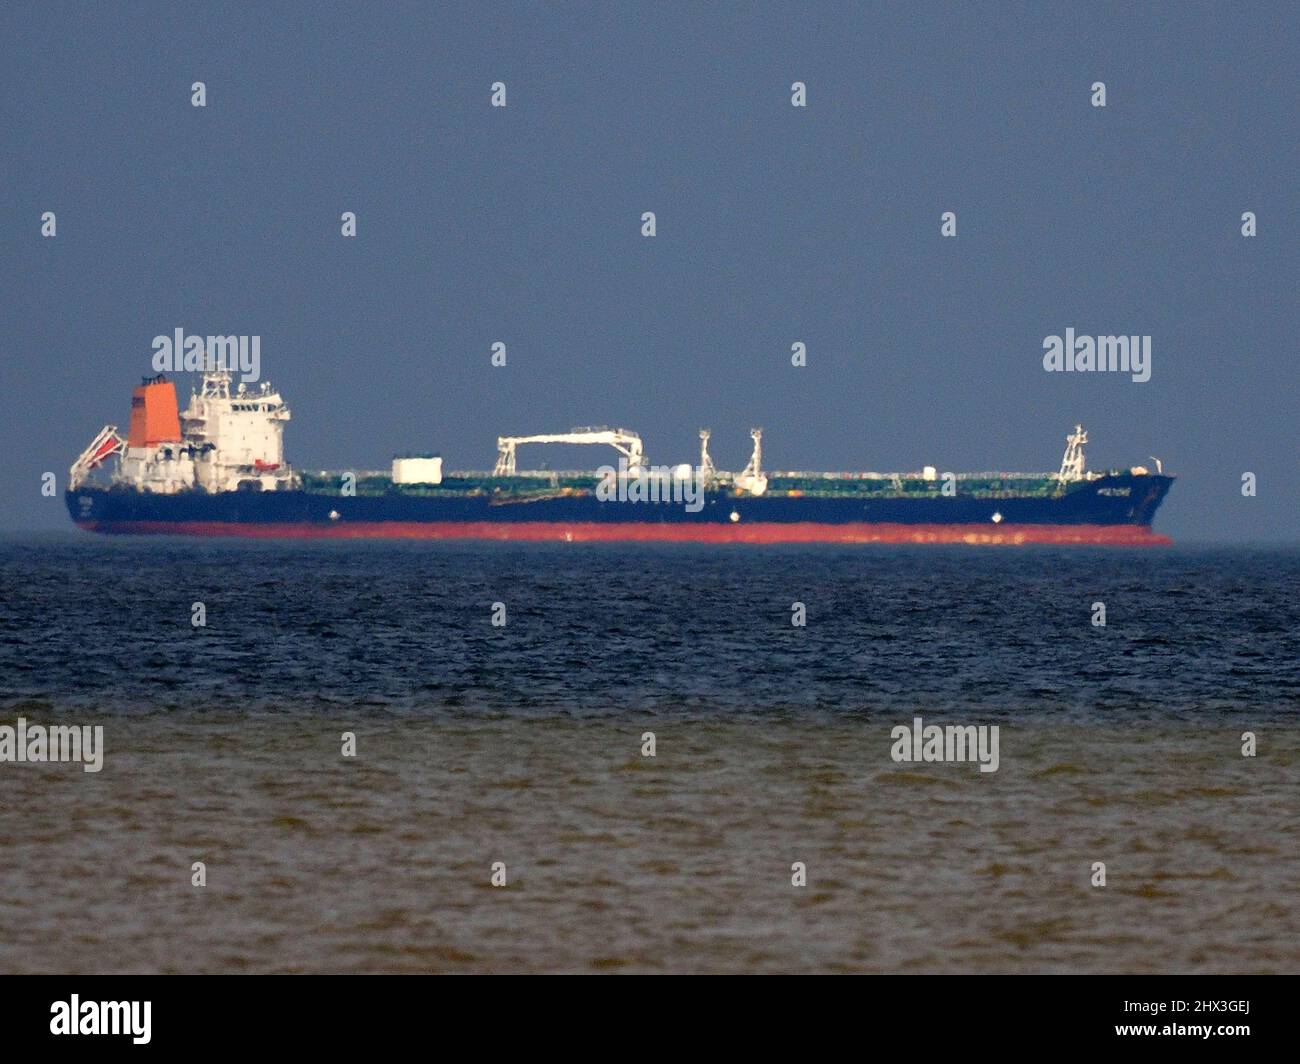 Sheerness, Kent, UK. 9th Mar, 2022. Surging fuel prices. Two oil tankers off the coast of Sheerness, Kent this afternoon. Pic: oil/chemical tanker 'PILTENE' anchored off Sheerness this afternoon.  James Bell/Alamy Live News Stock Photo